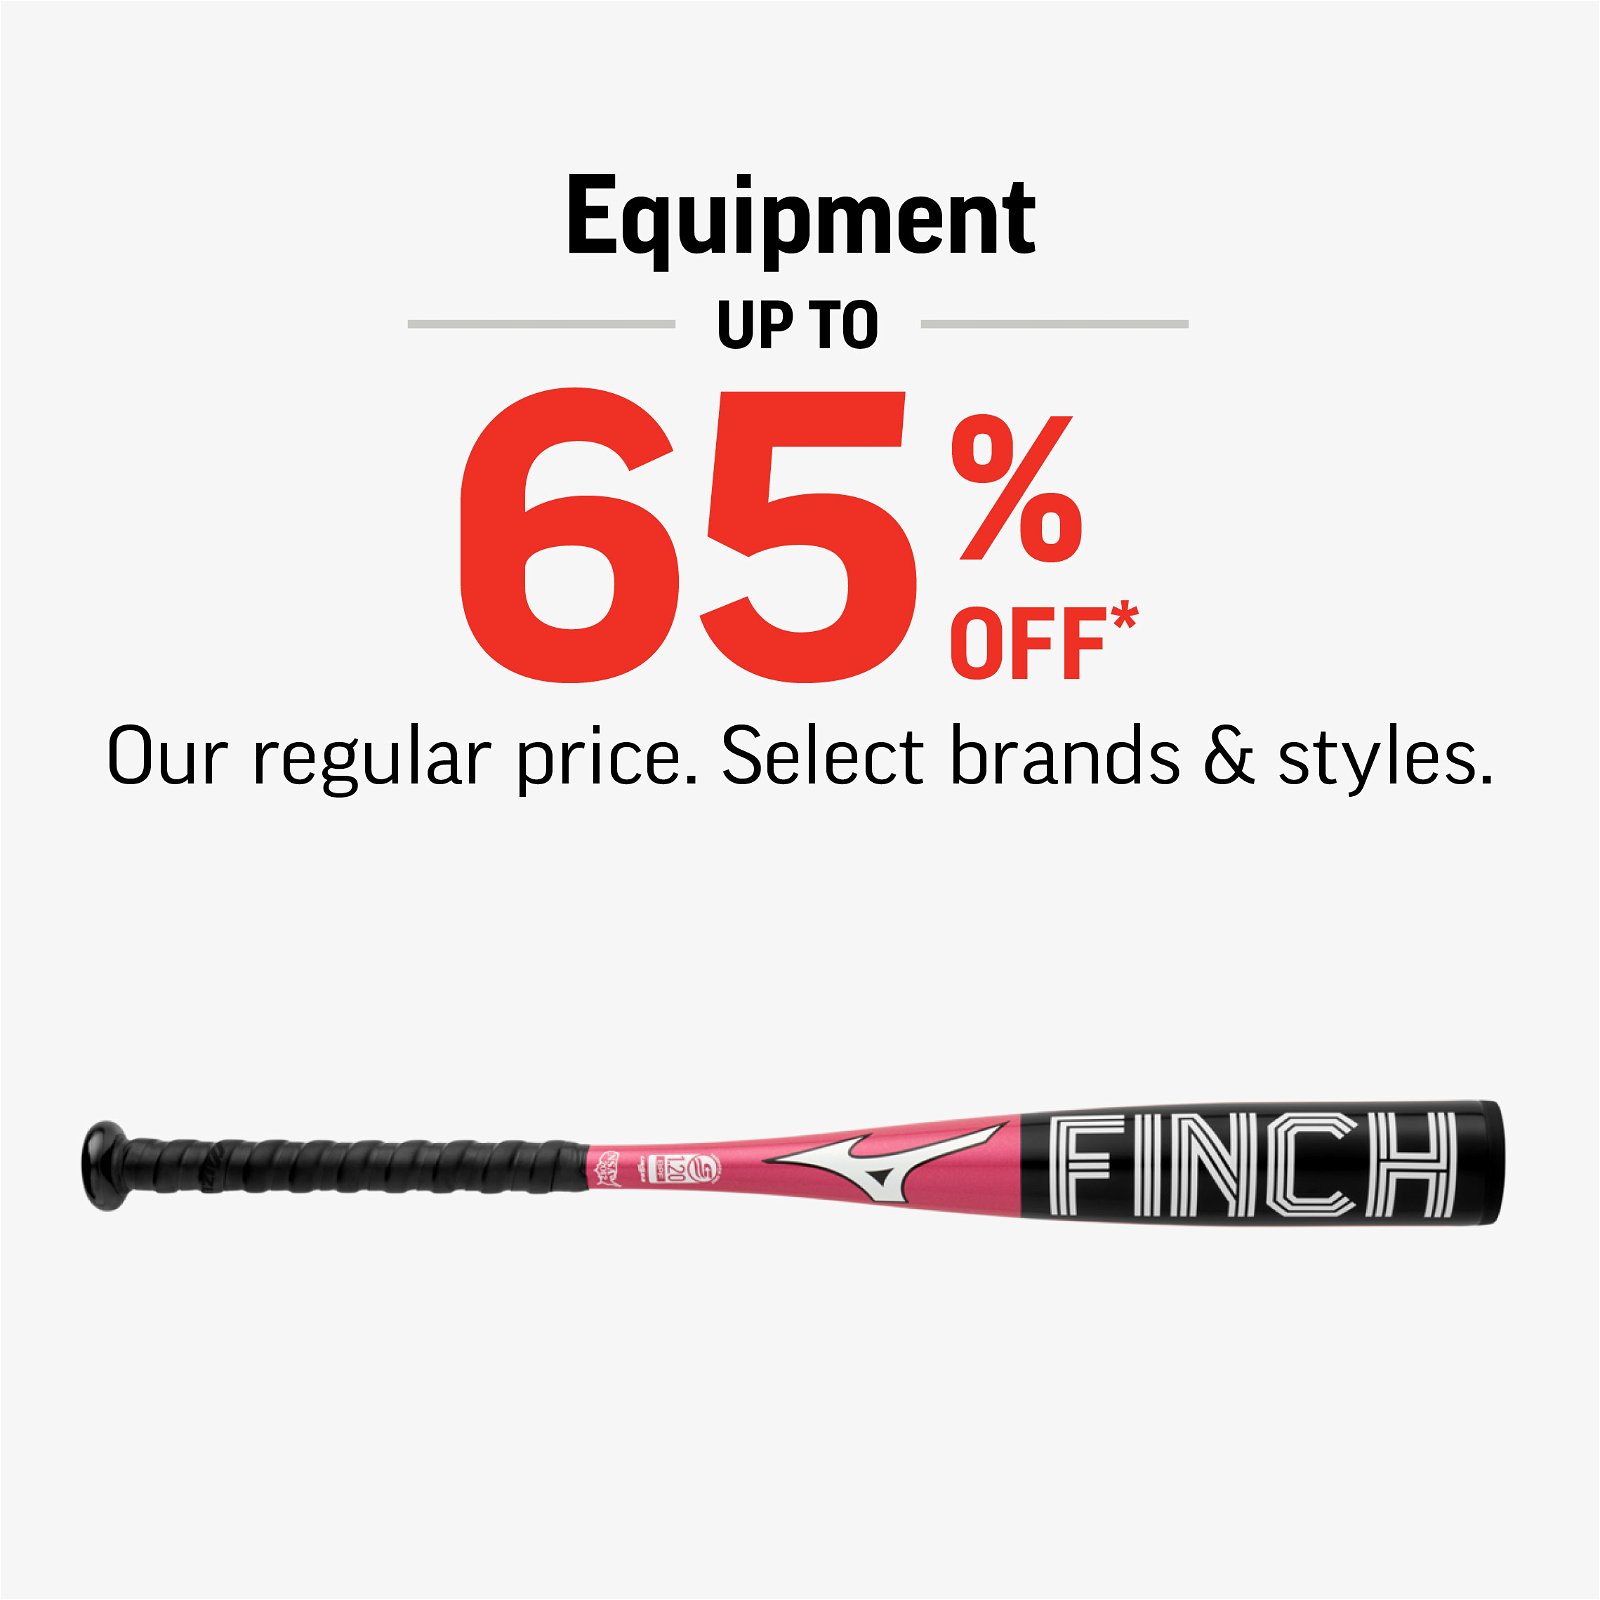 EQUIPMENT UP TO 65% OFF